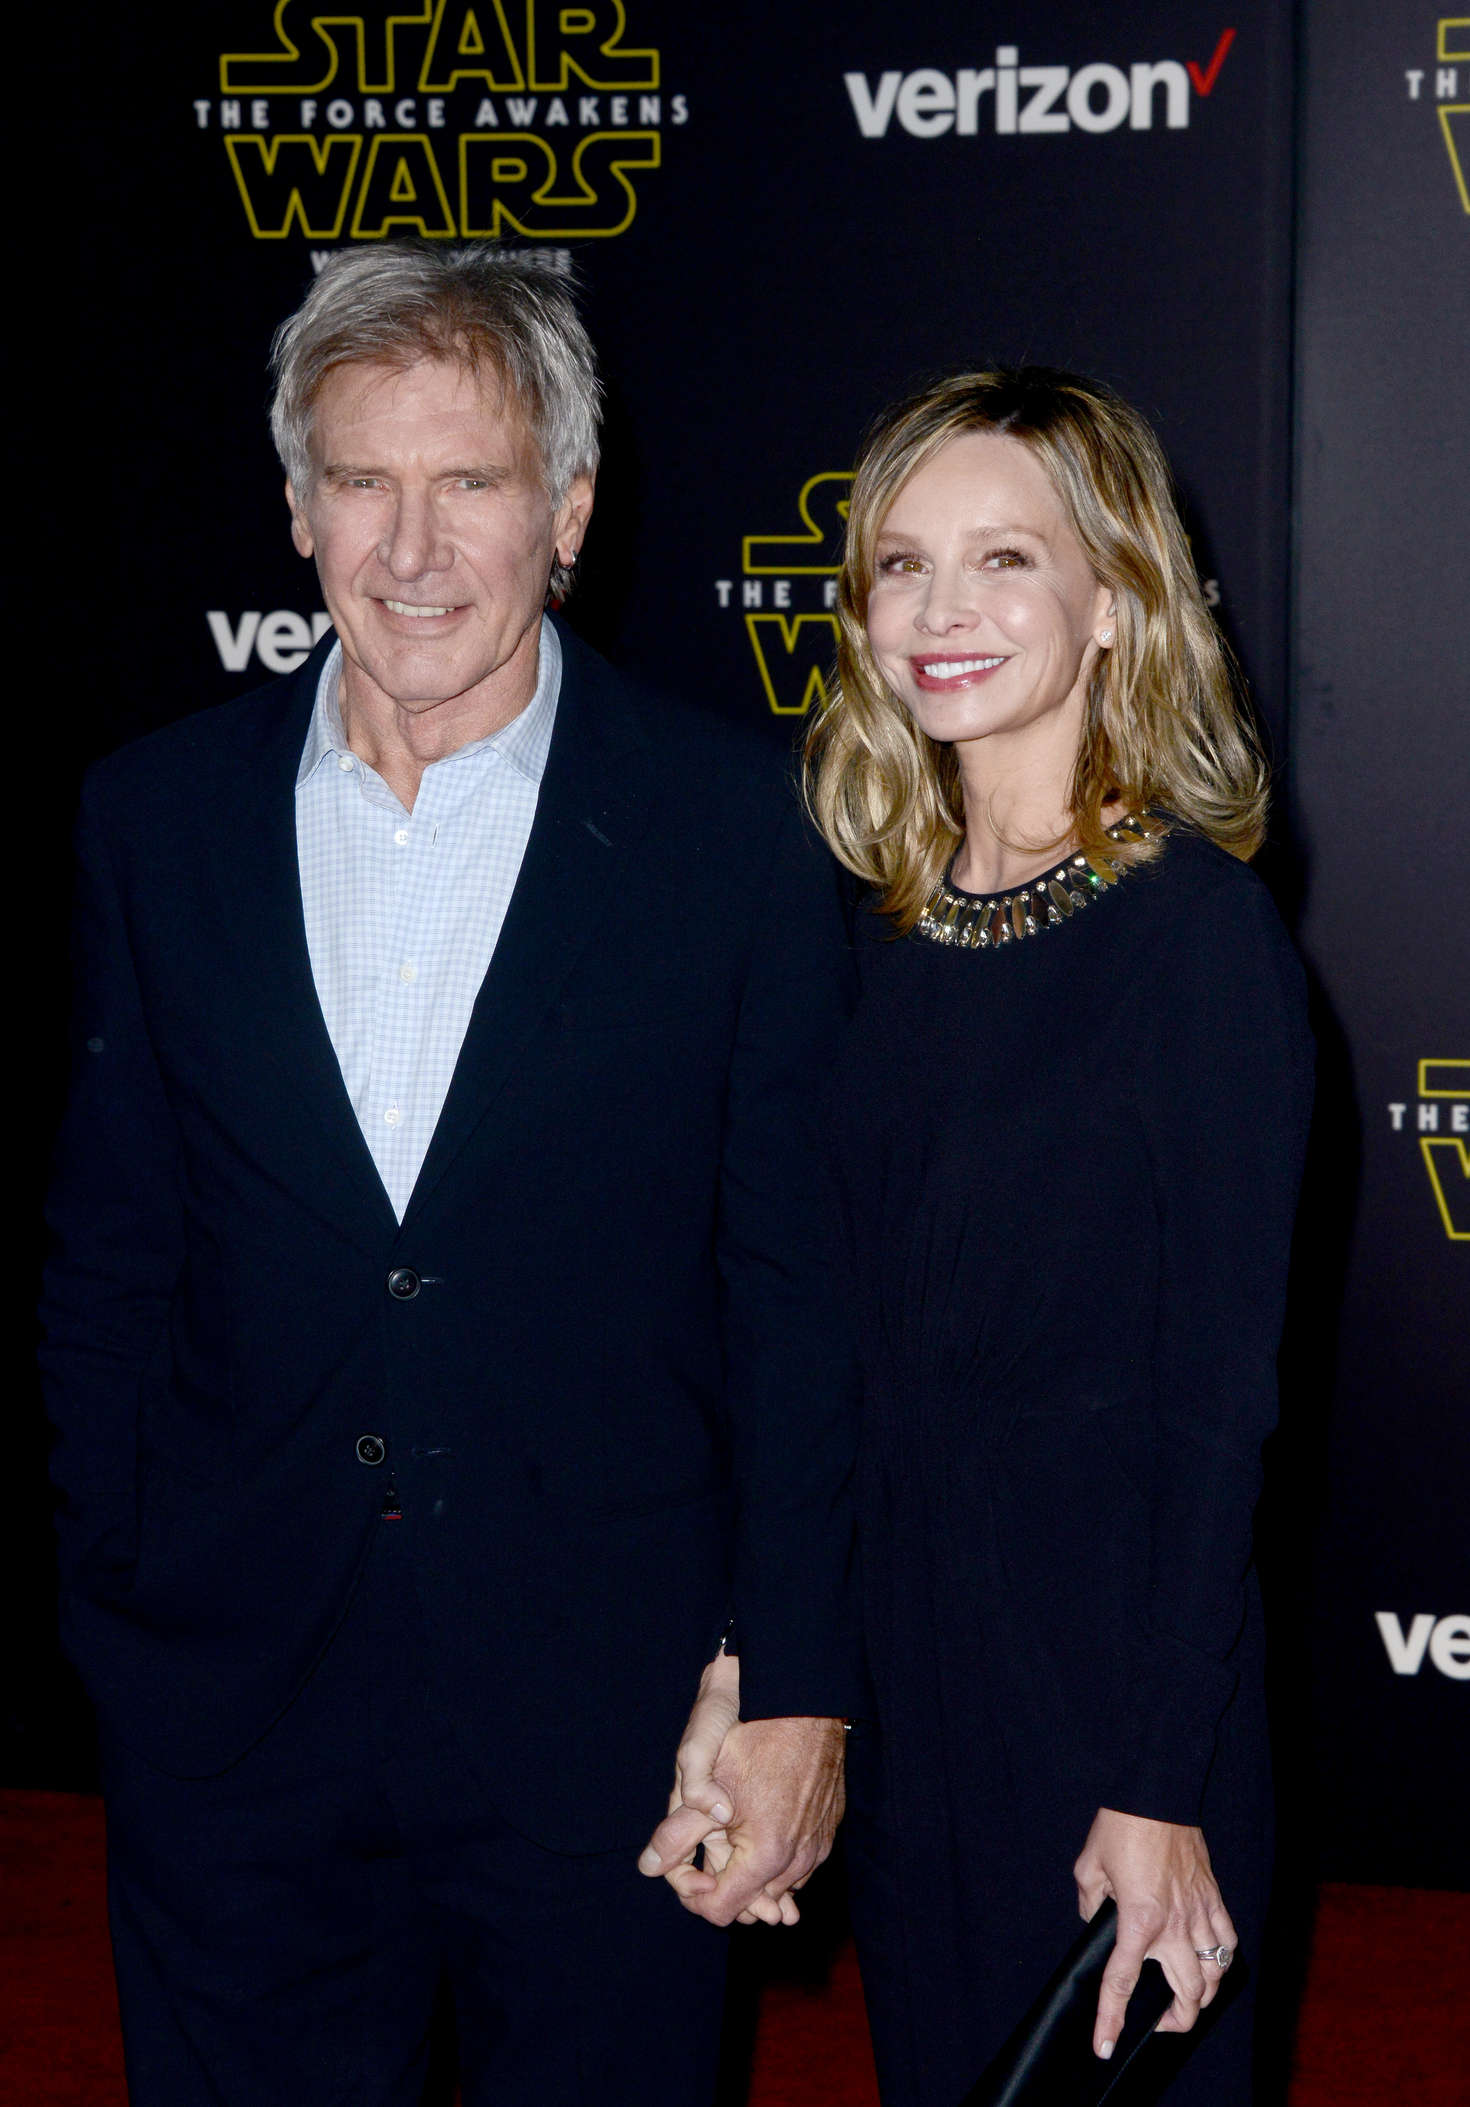 Calista Flockhart Star Wars The Force Awakens Premiere in Hollywood